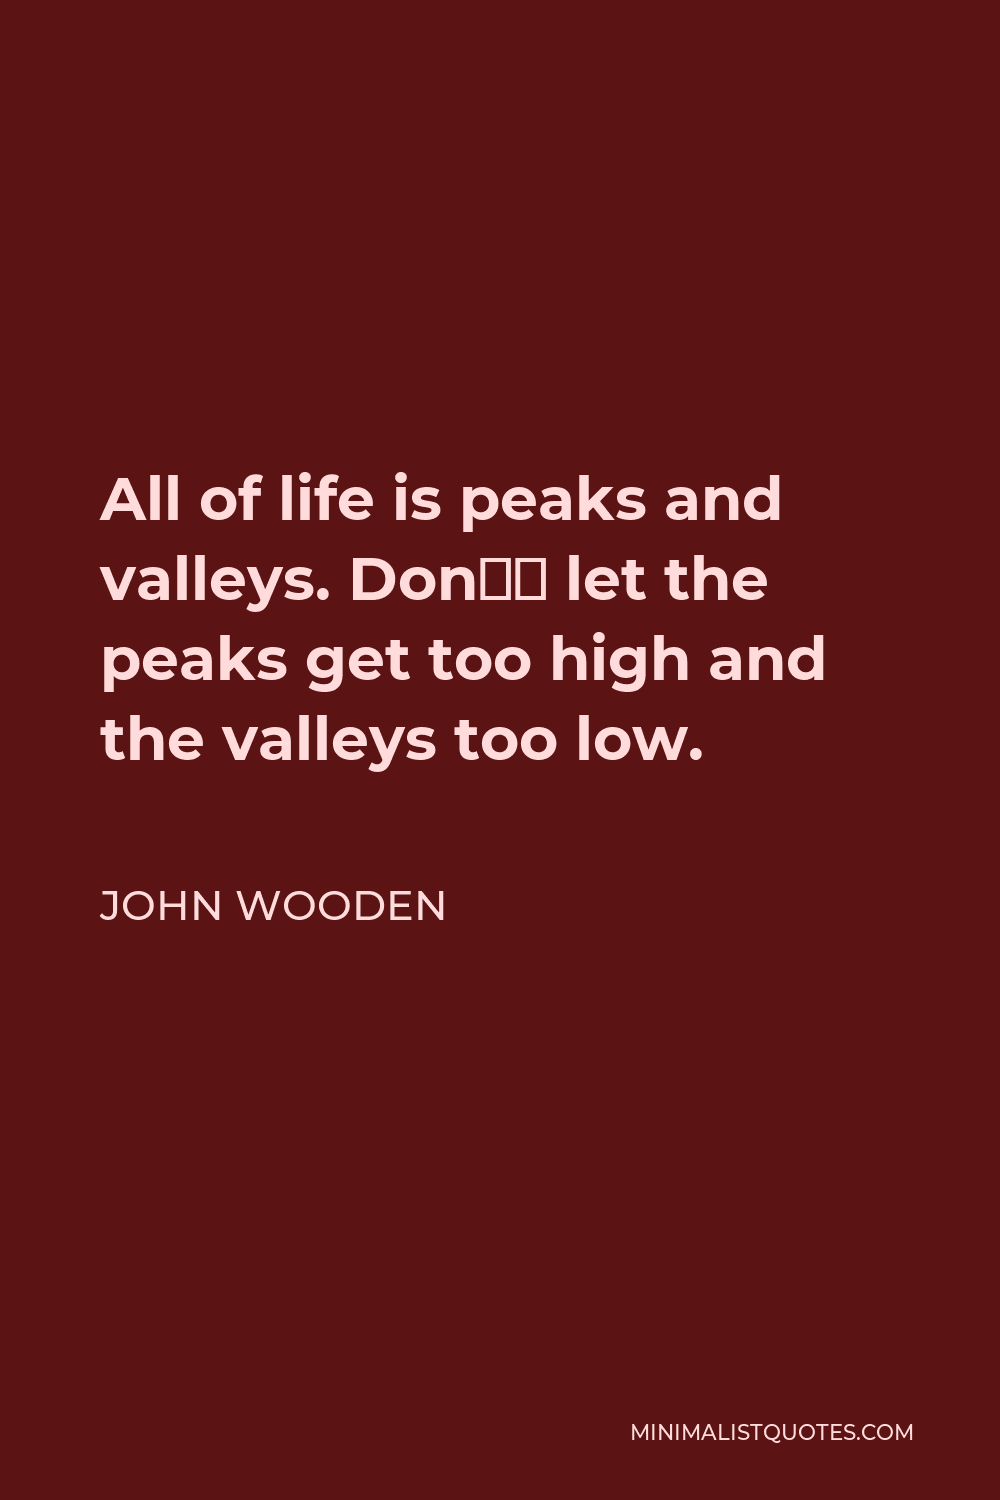 John Wooden Quote - All of life is peaks and valleys. Don’t let the peaks get too high and the valleys too low.